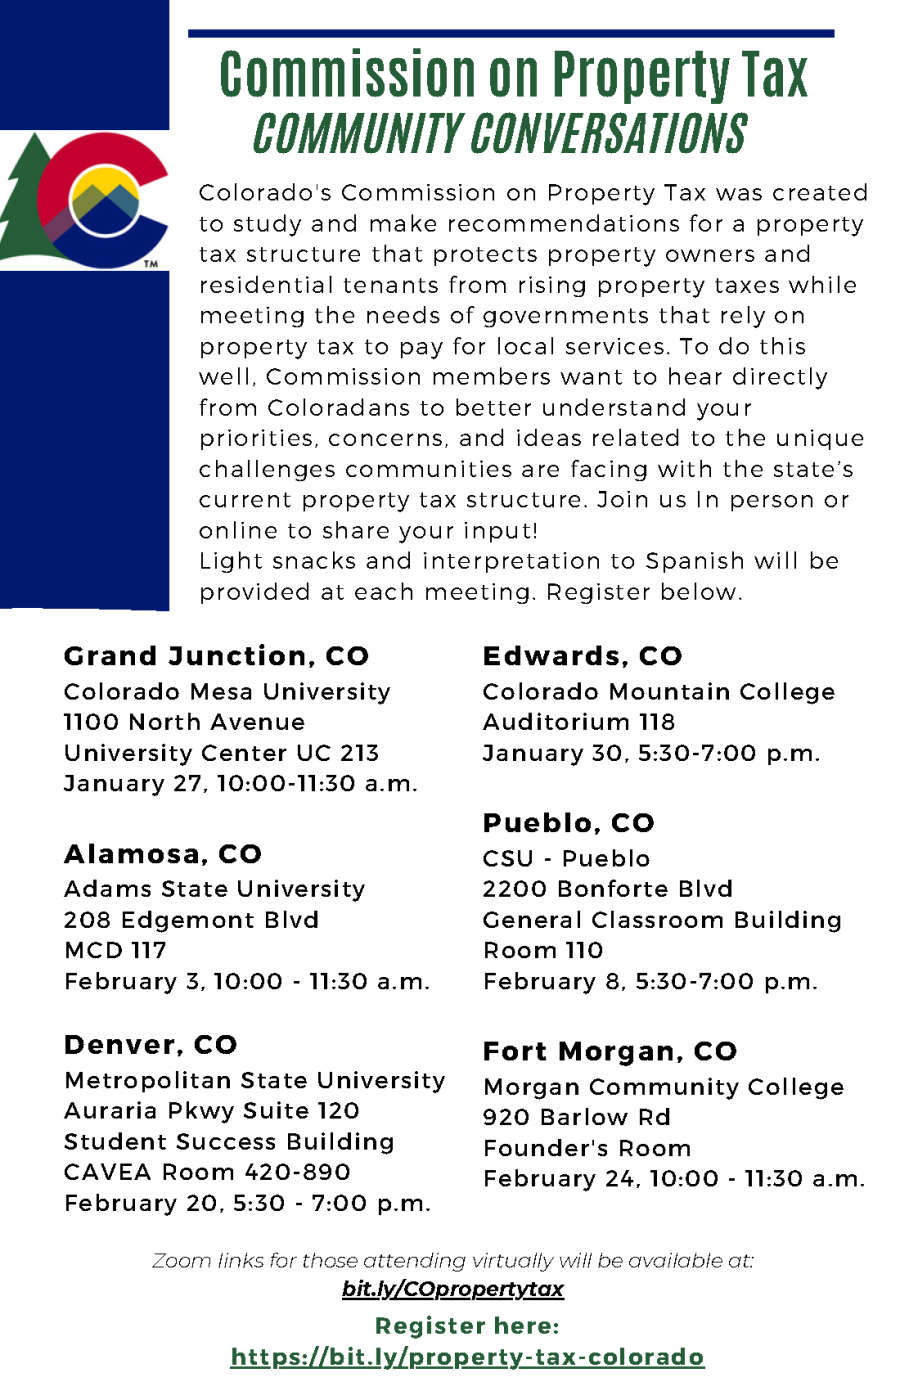 A flyer for the community conversation hosted by Colorado's Commission on Property Tax on Saturday, Jan. 27, from 10 to 11:30 a.m., at Colorado Mesa University, University Center UC 213, 1100 North Avenue.